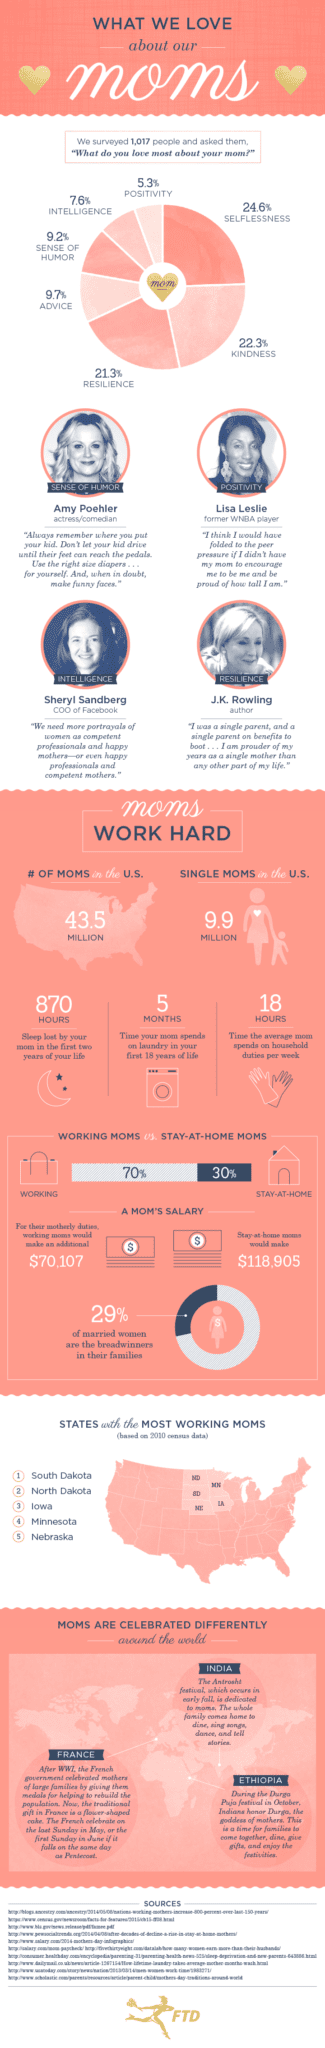 Why We Love Mom - This fun INFOGRAPHIC clearly illustrates what we love about our moms. 